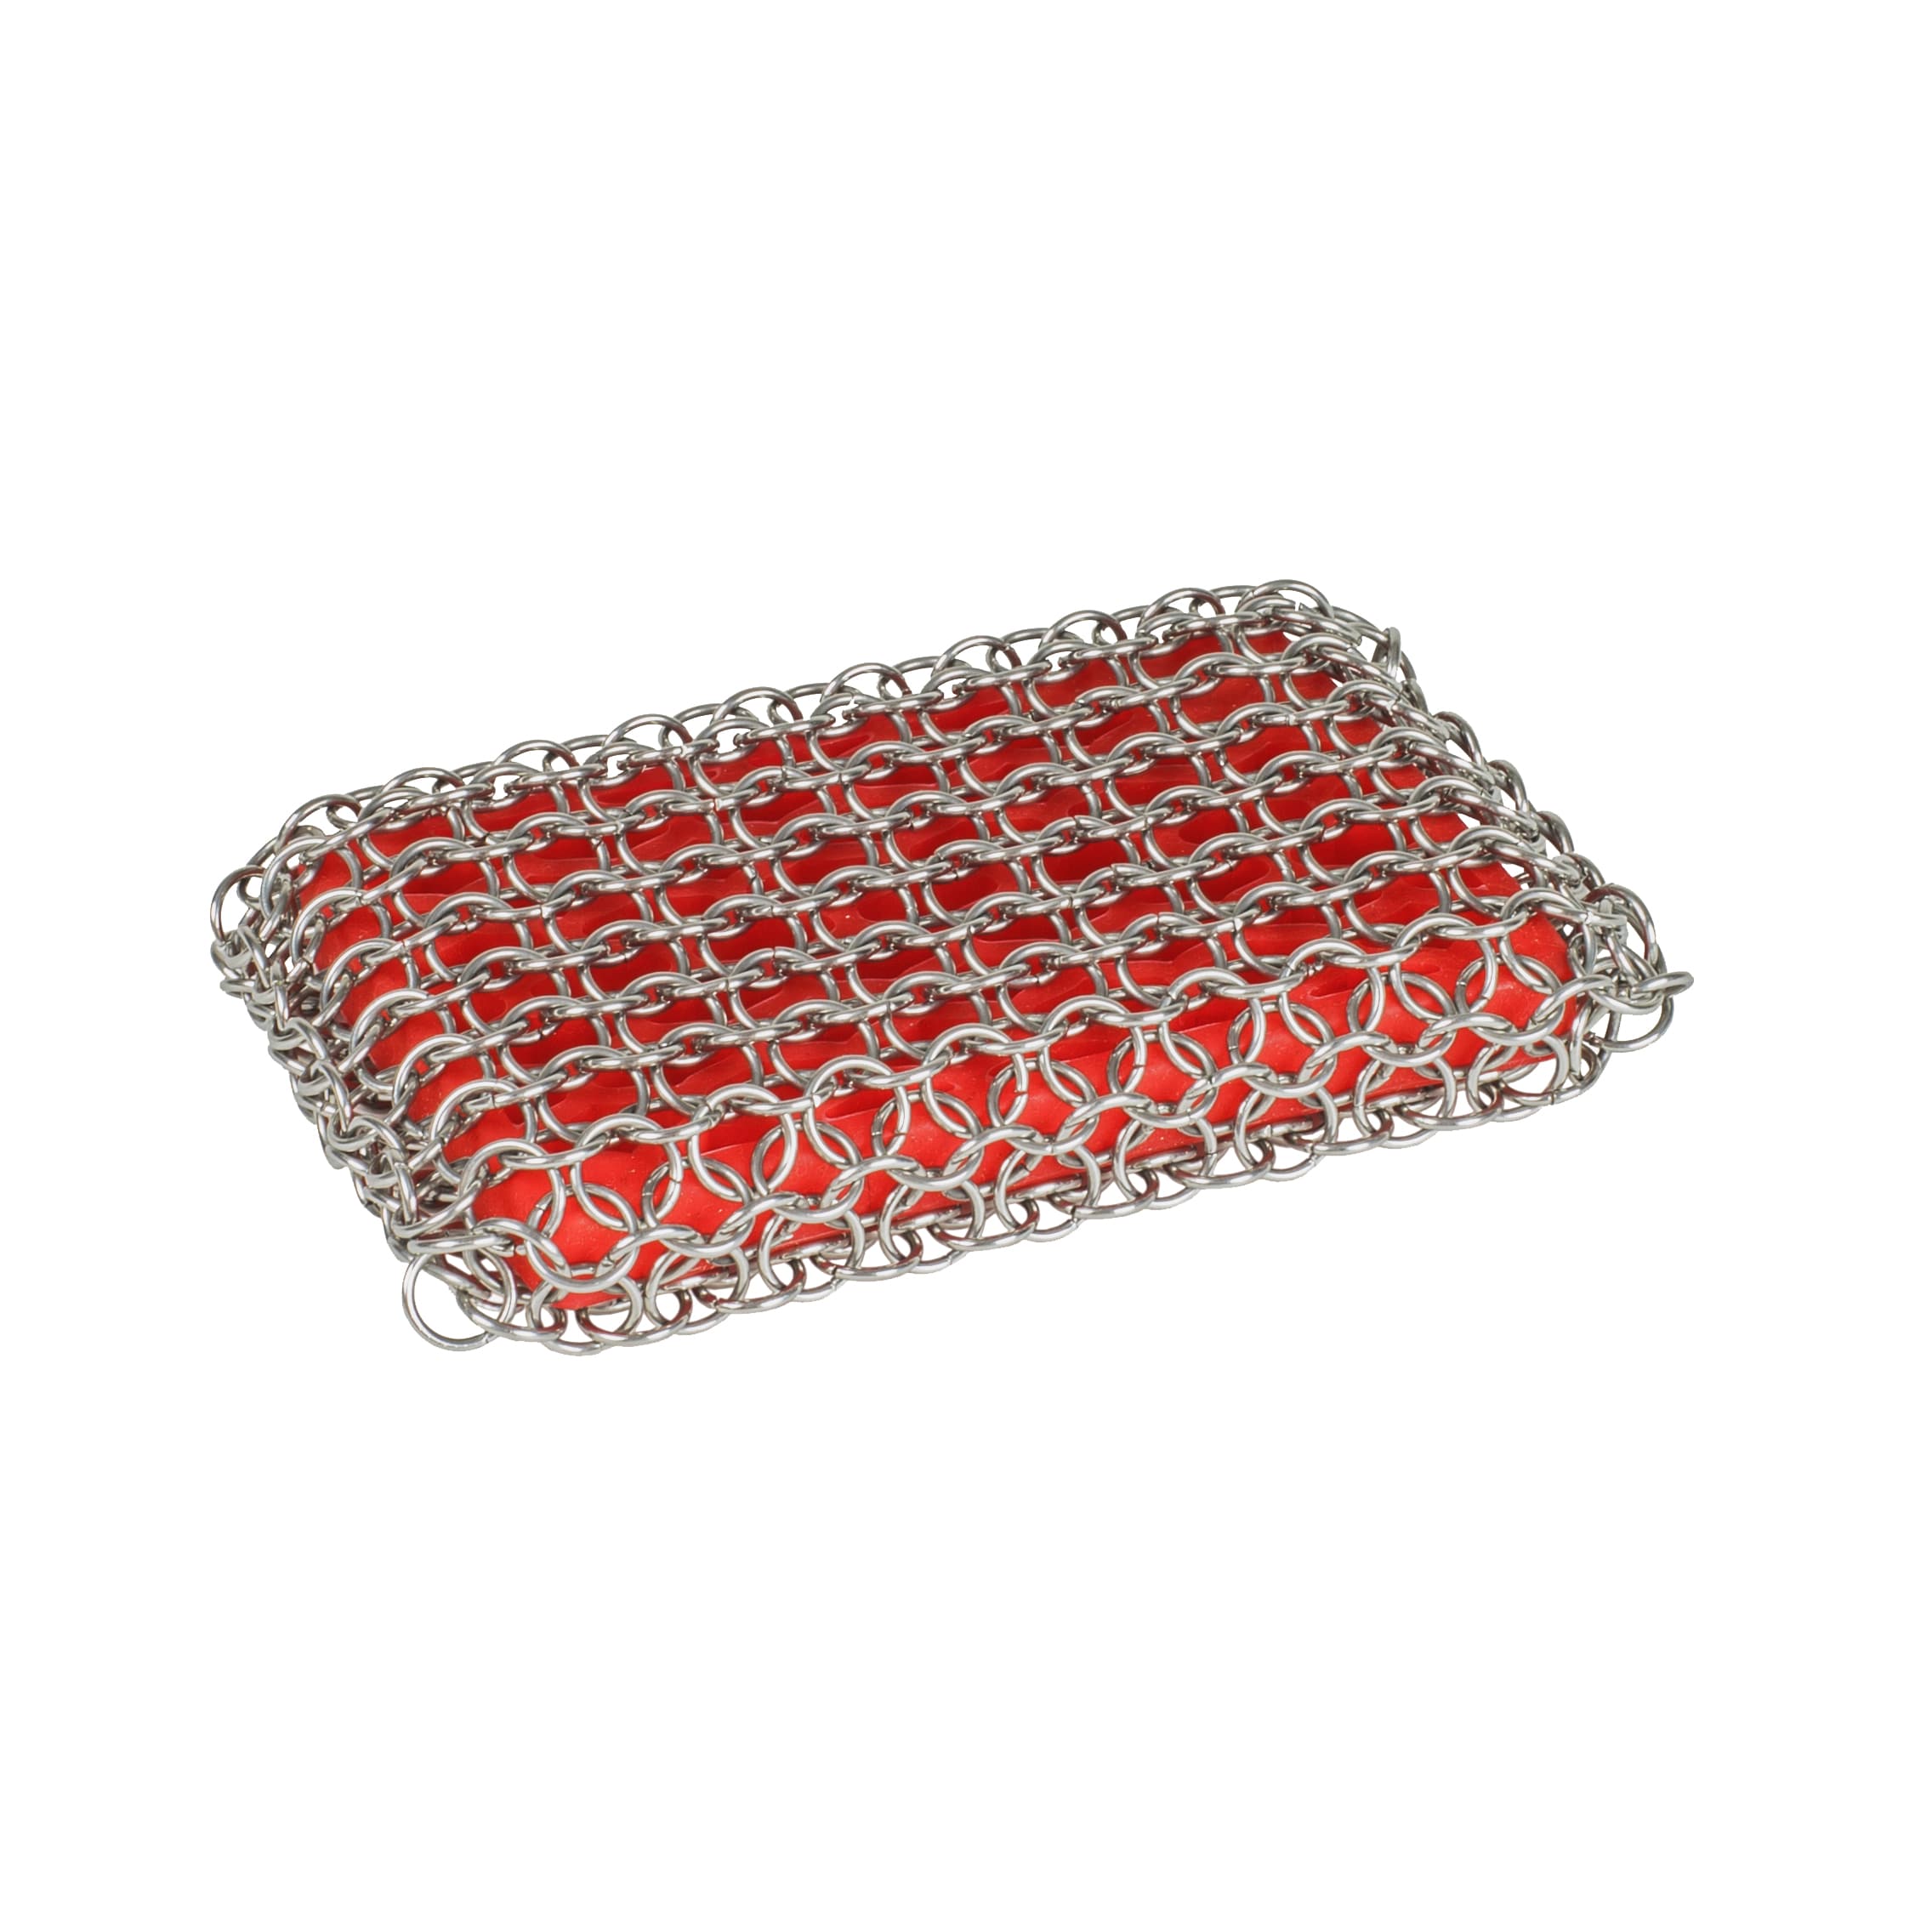 Chainmail Kitchen Cast Iron Pan Scrubber 8 X 8 - China Chain Mail